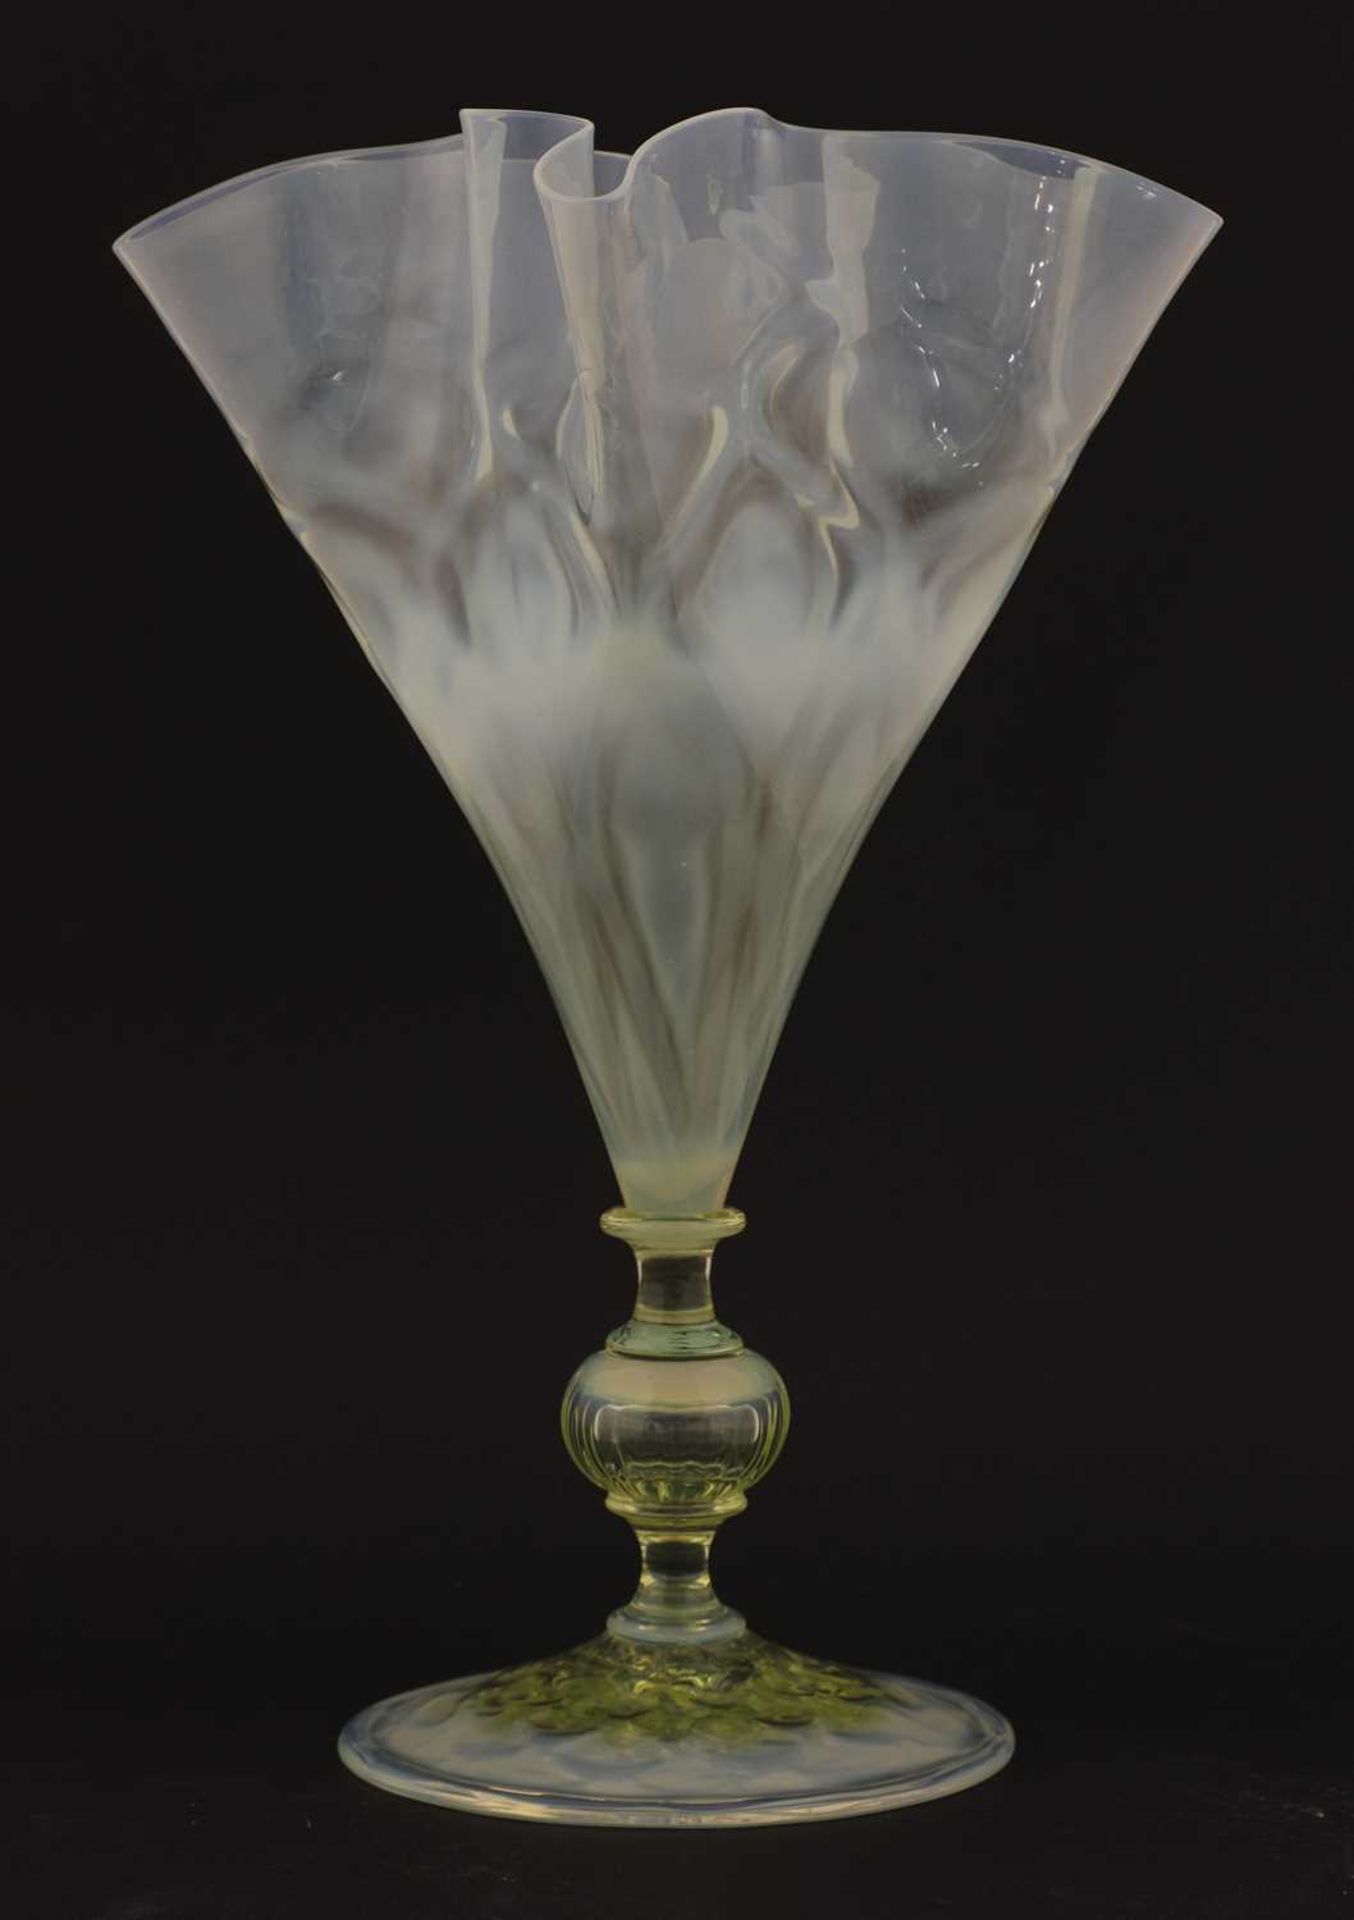 A James Powell & Sons Whitefriars opal glass goblet vase,